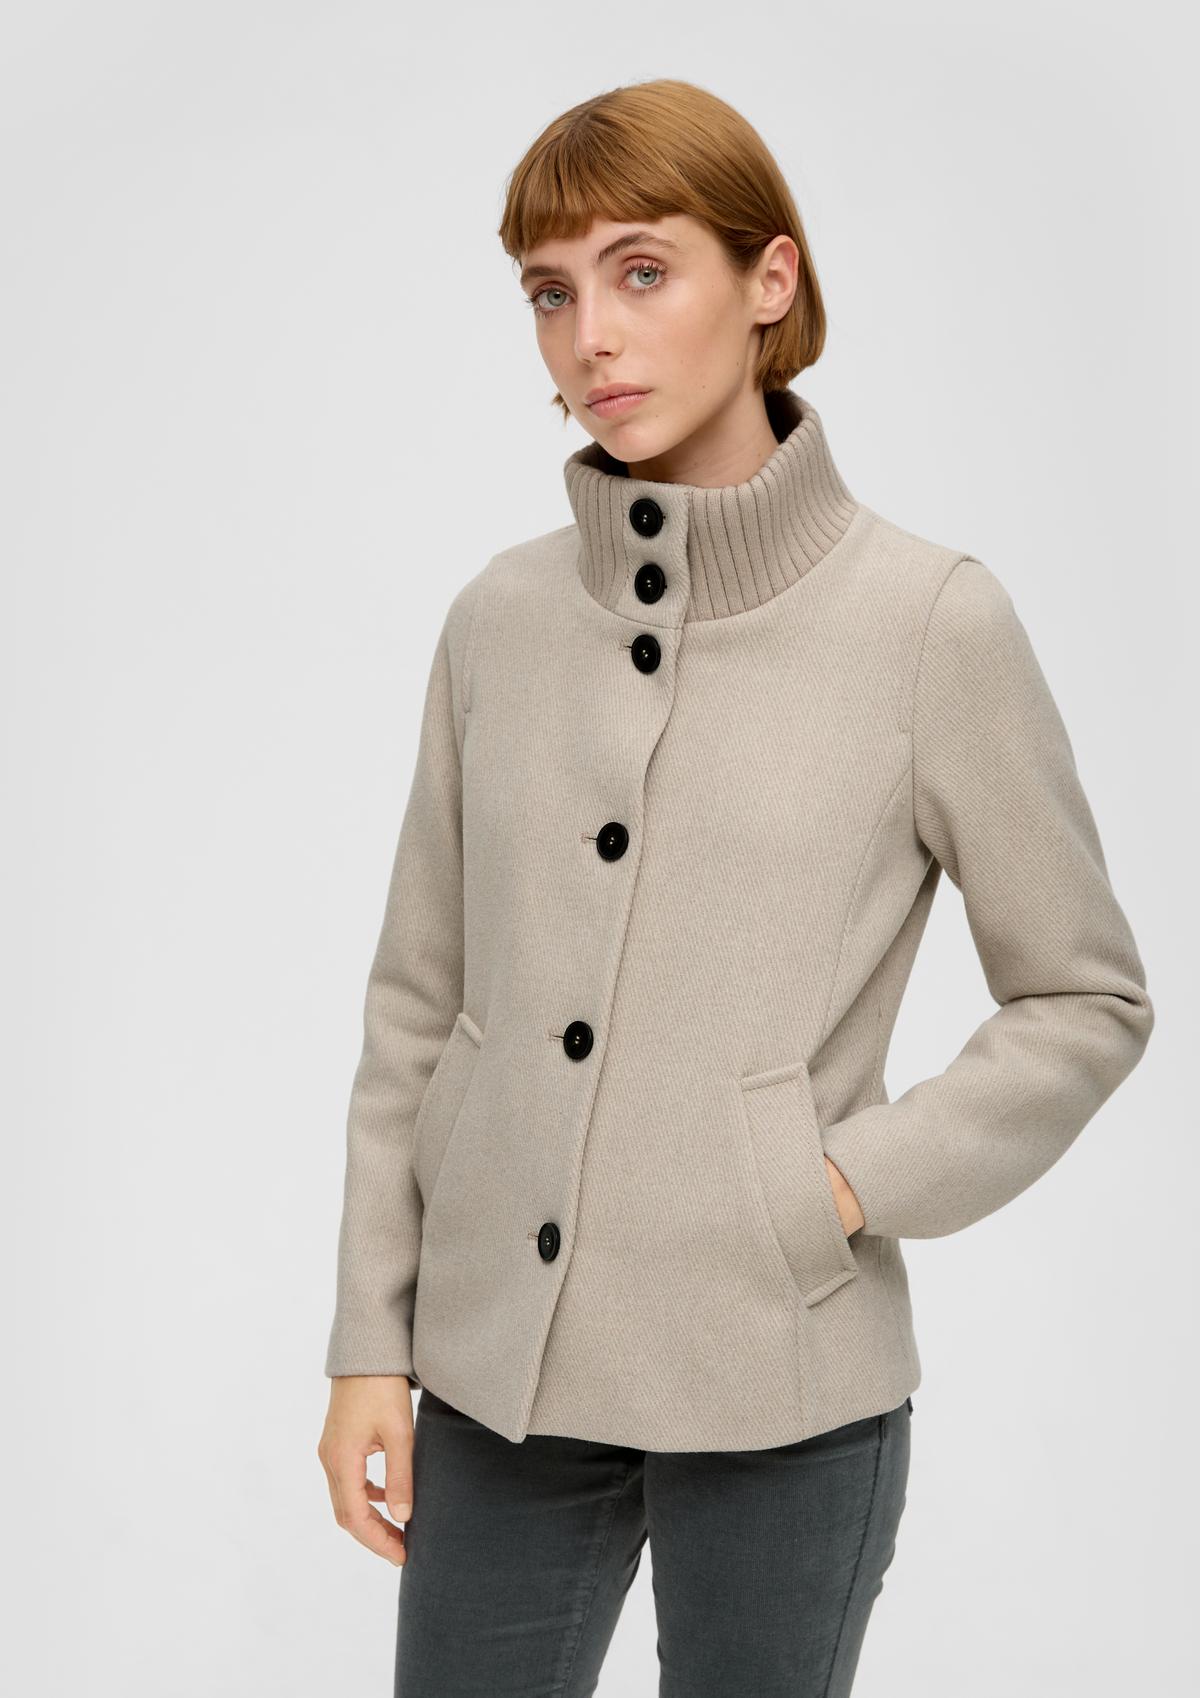 Jacket with a rib knit stand-up collar